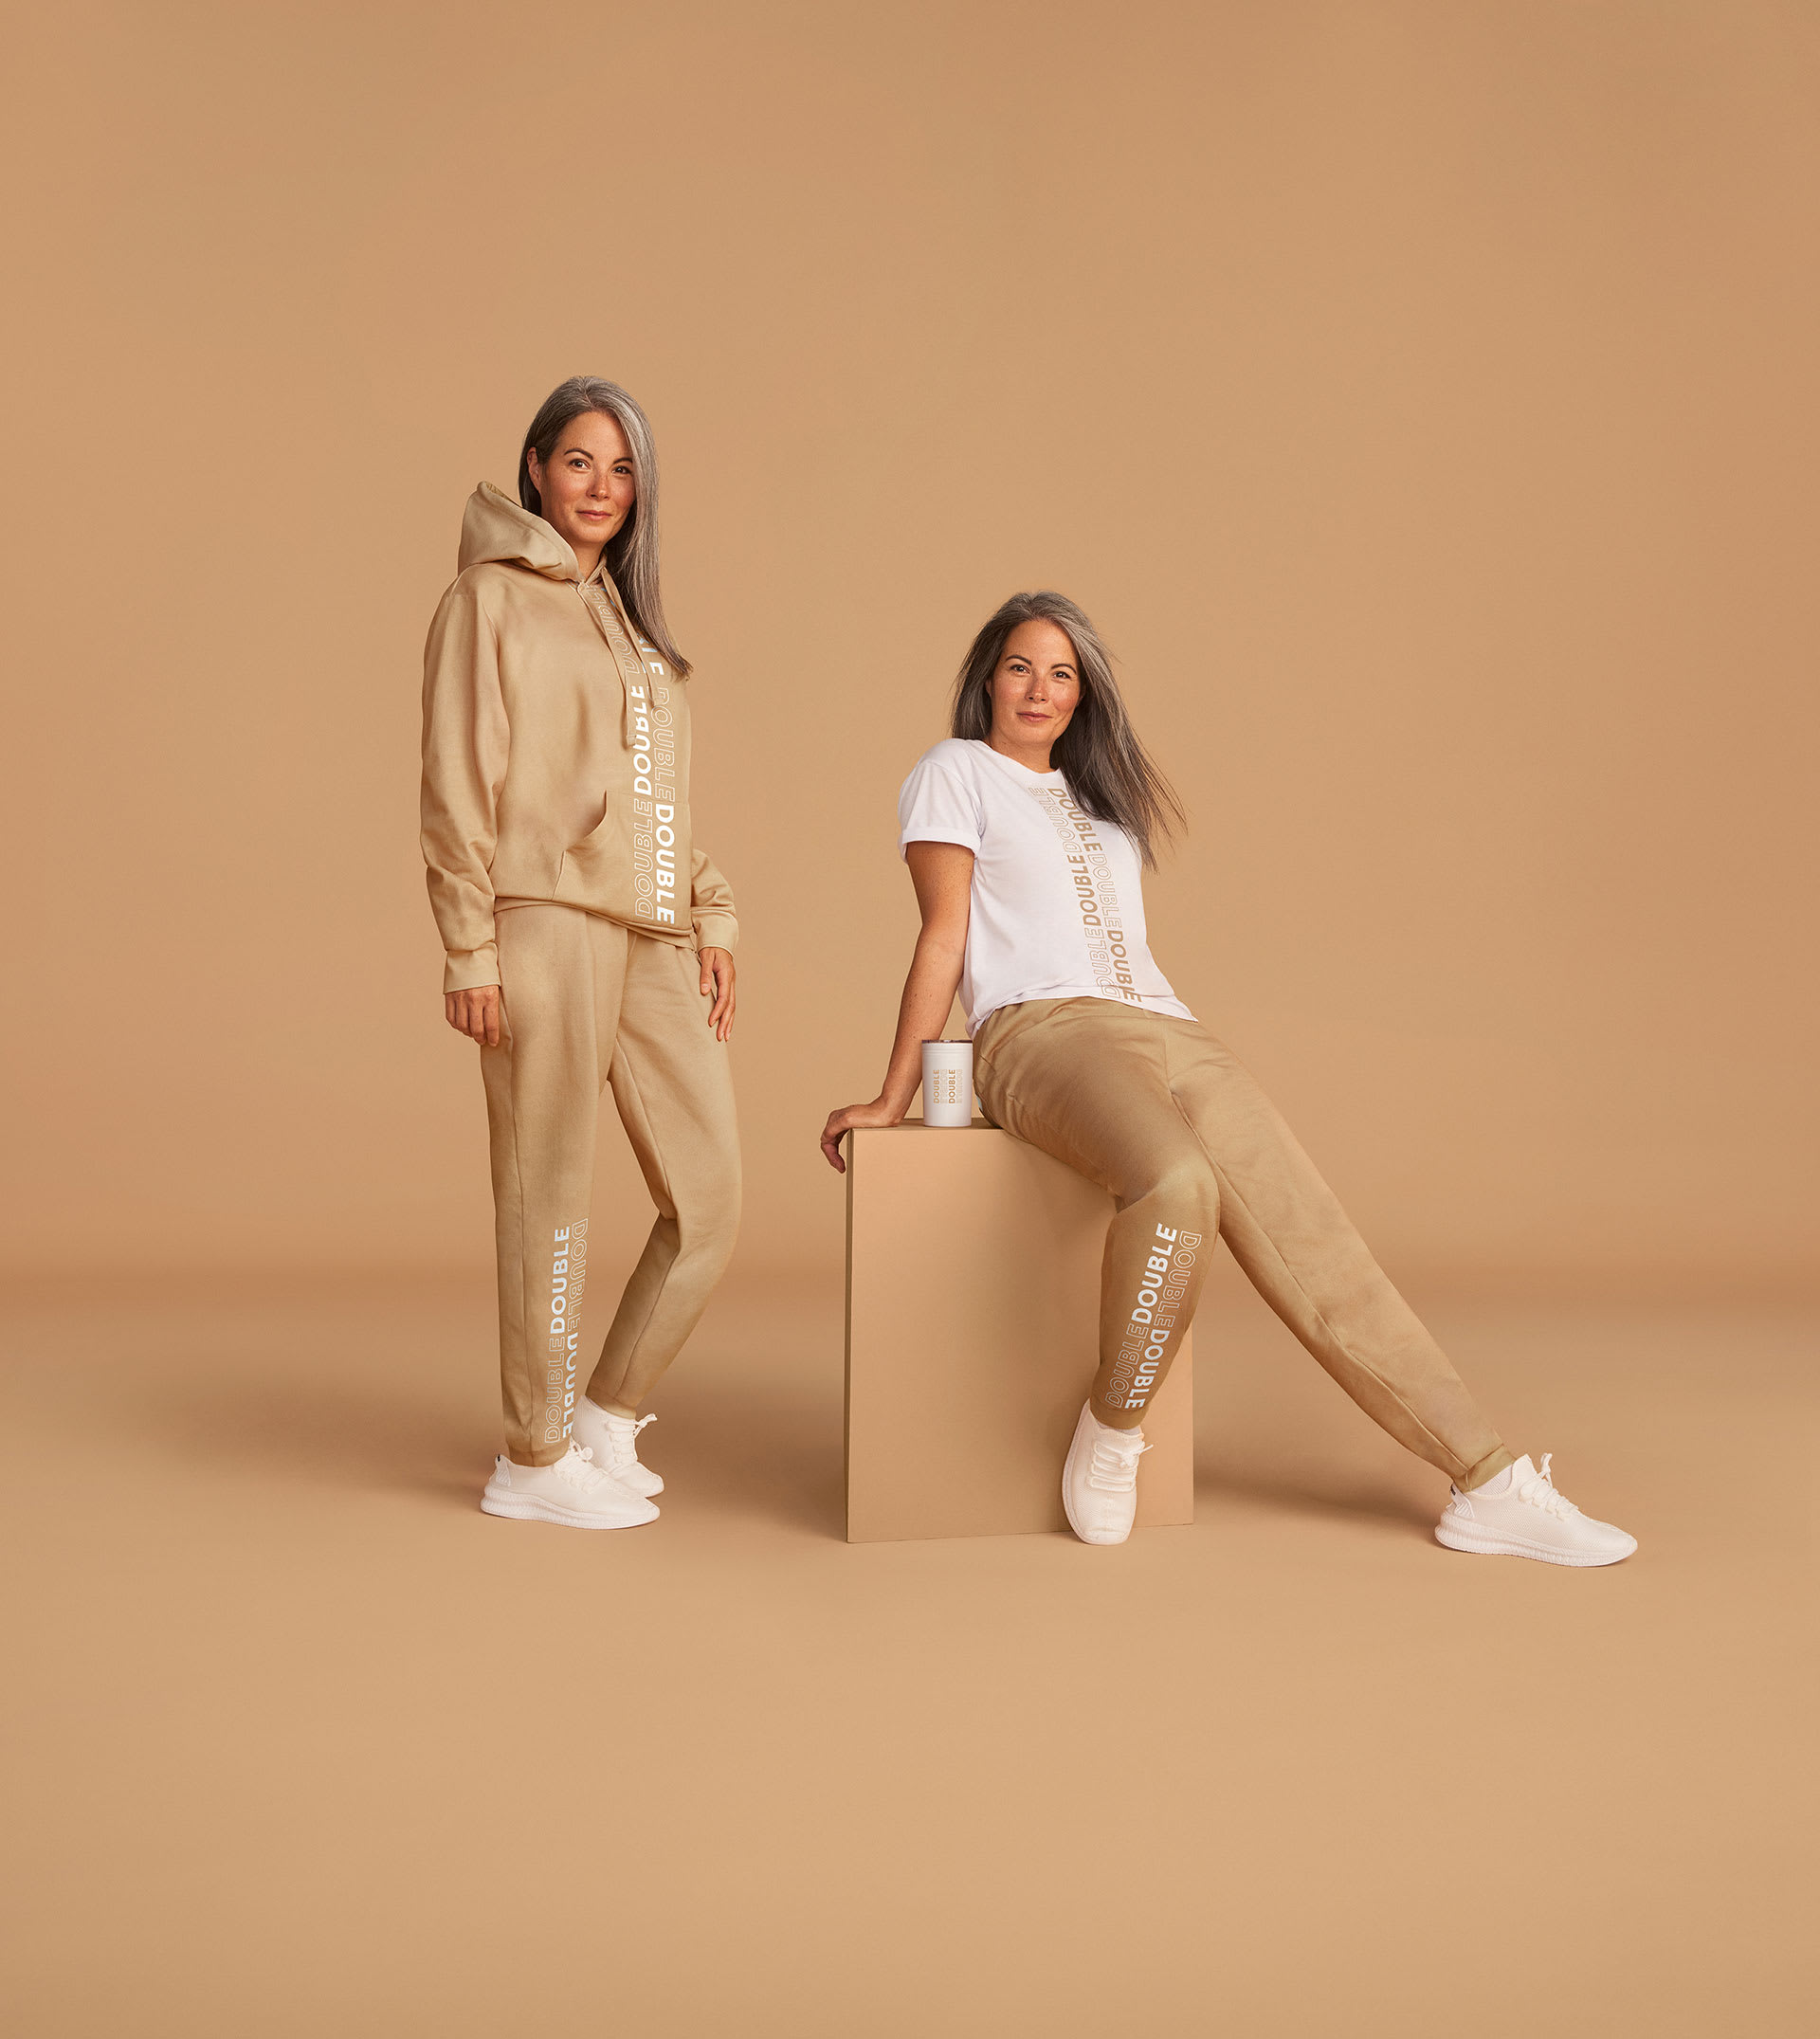 Tim Hortons Double Double-Inspired clothing collection